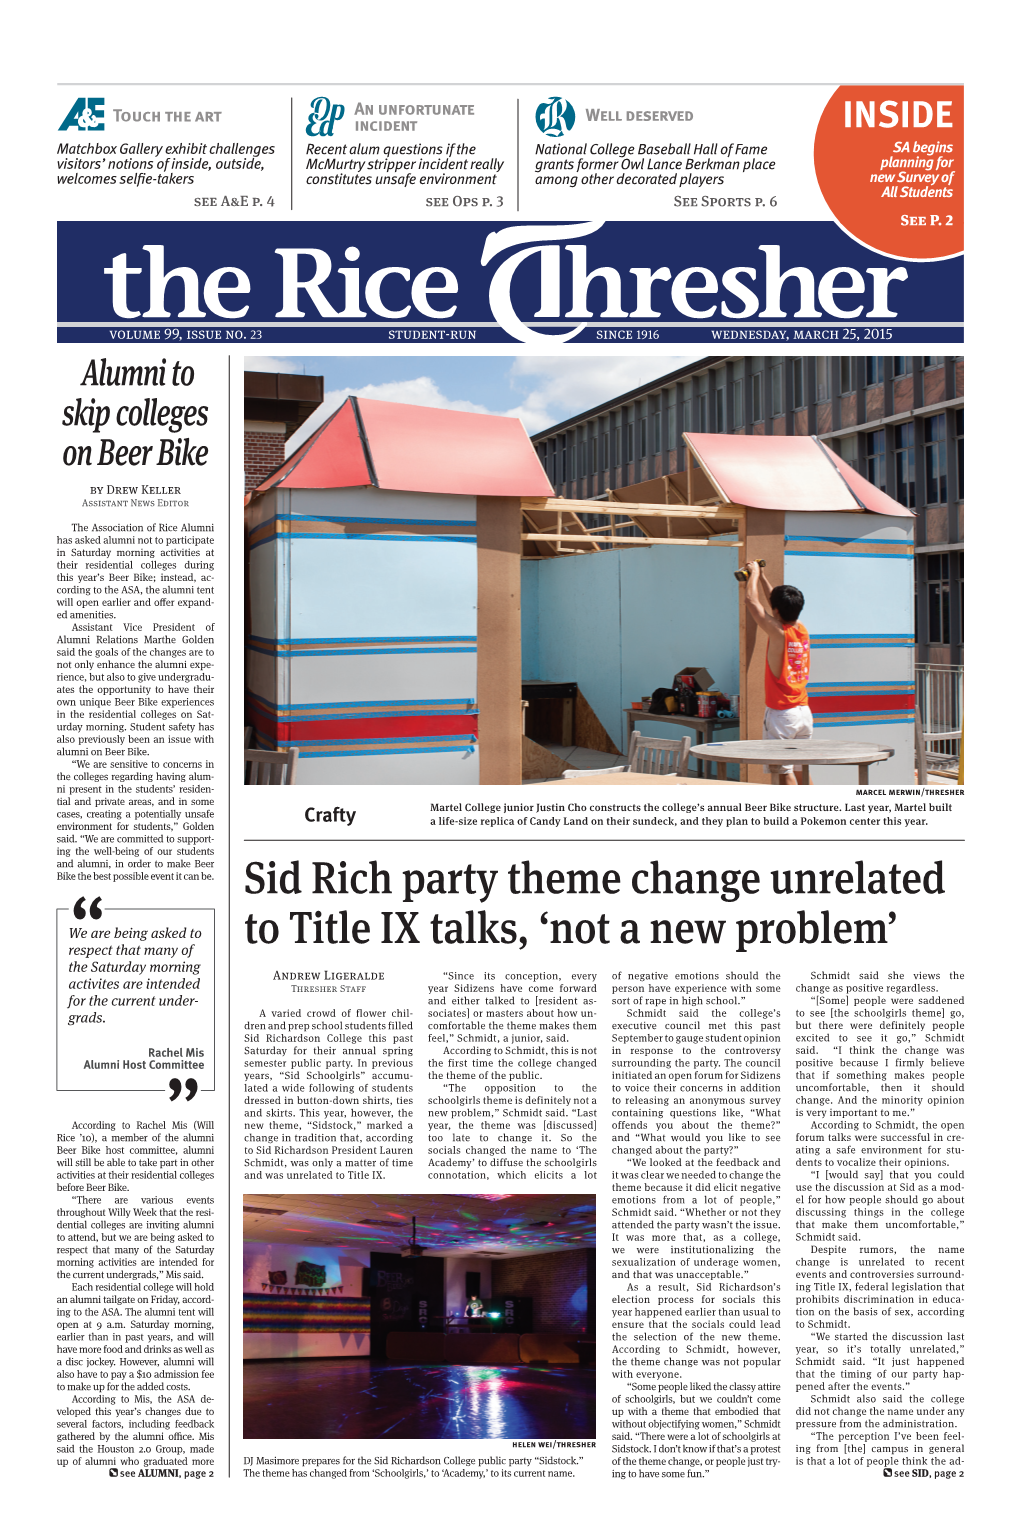 The Rice Thresher, Vol. 99, No. 23, Ed. 1 Wednesday, March 25, 2015